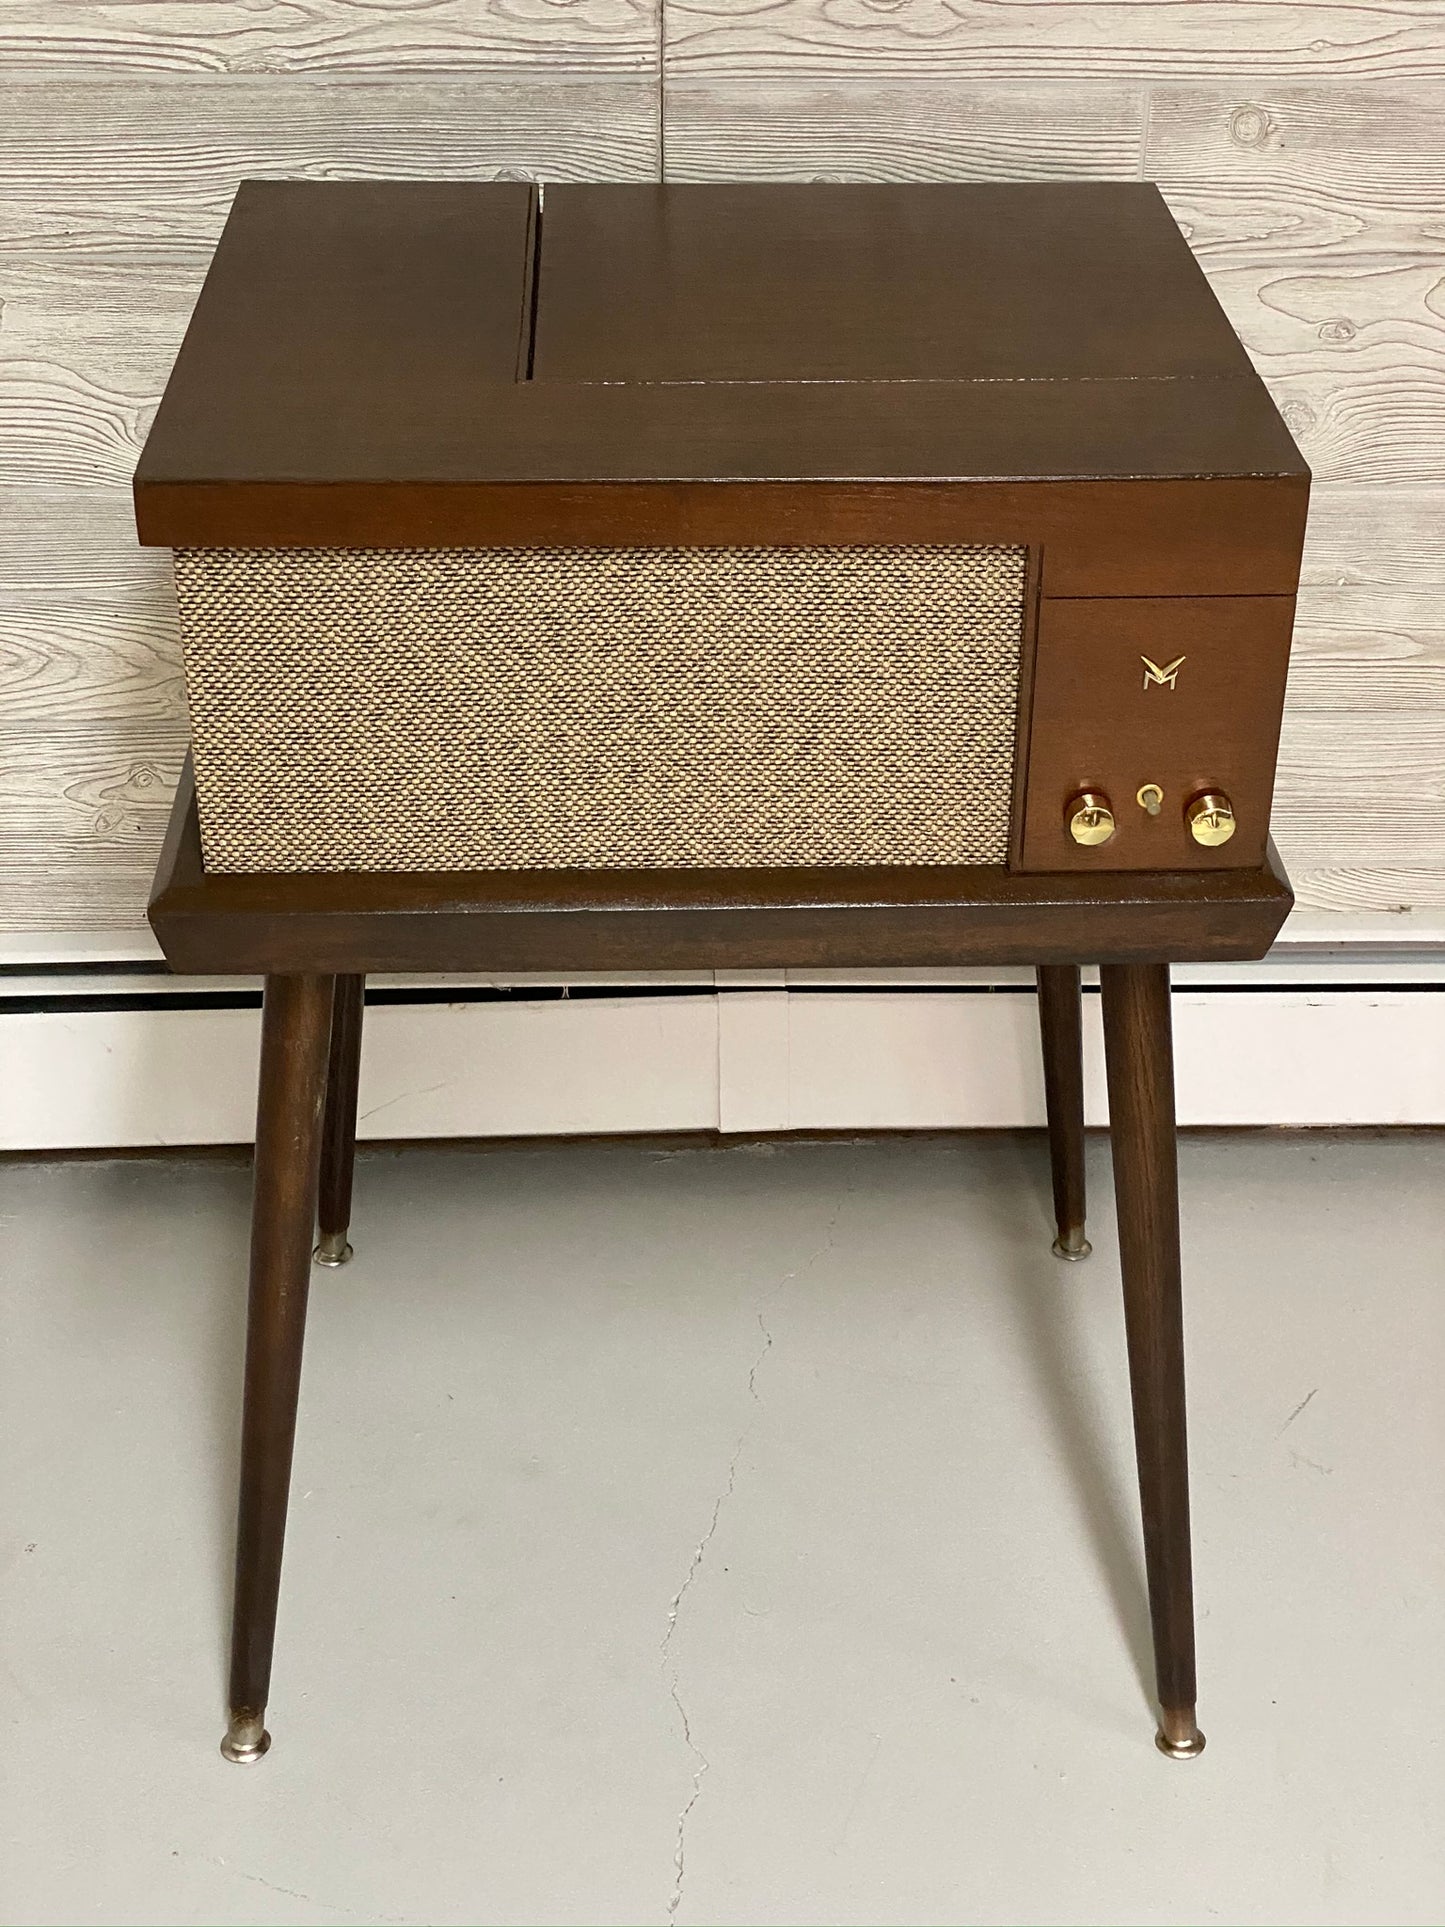 **SOLD OUT** VOICE OF MUSIC High Fidelity Stereo Record Player Changer Consolette VM Alexa The Vintedge Co.